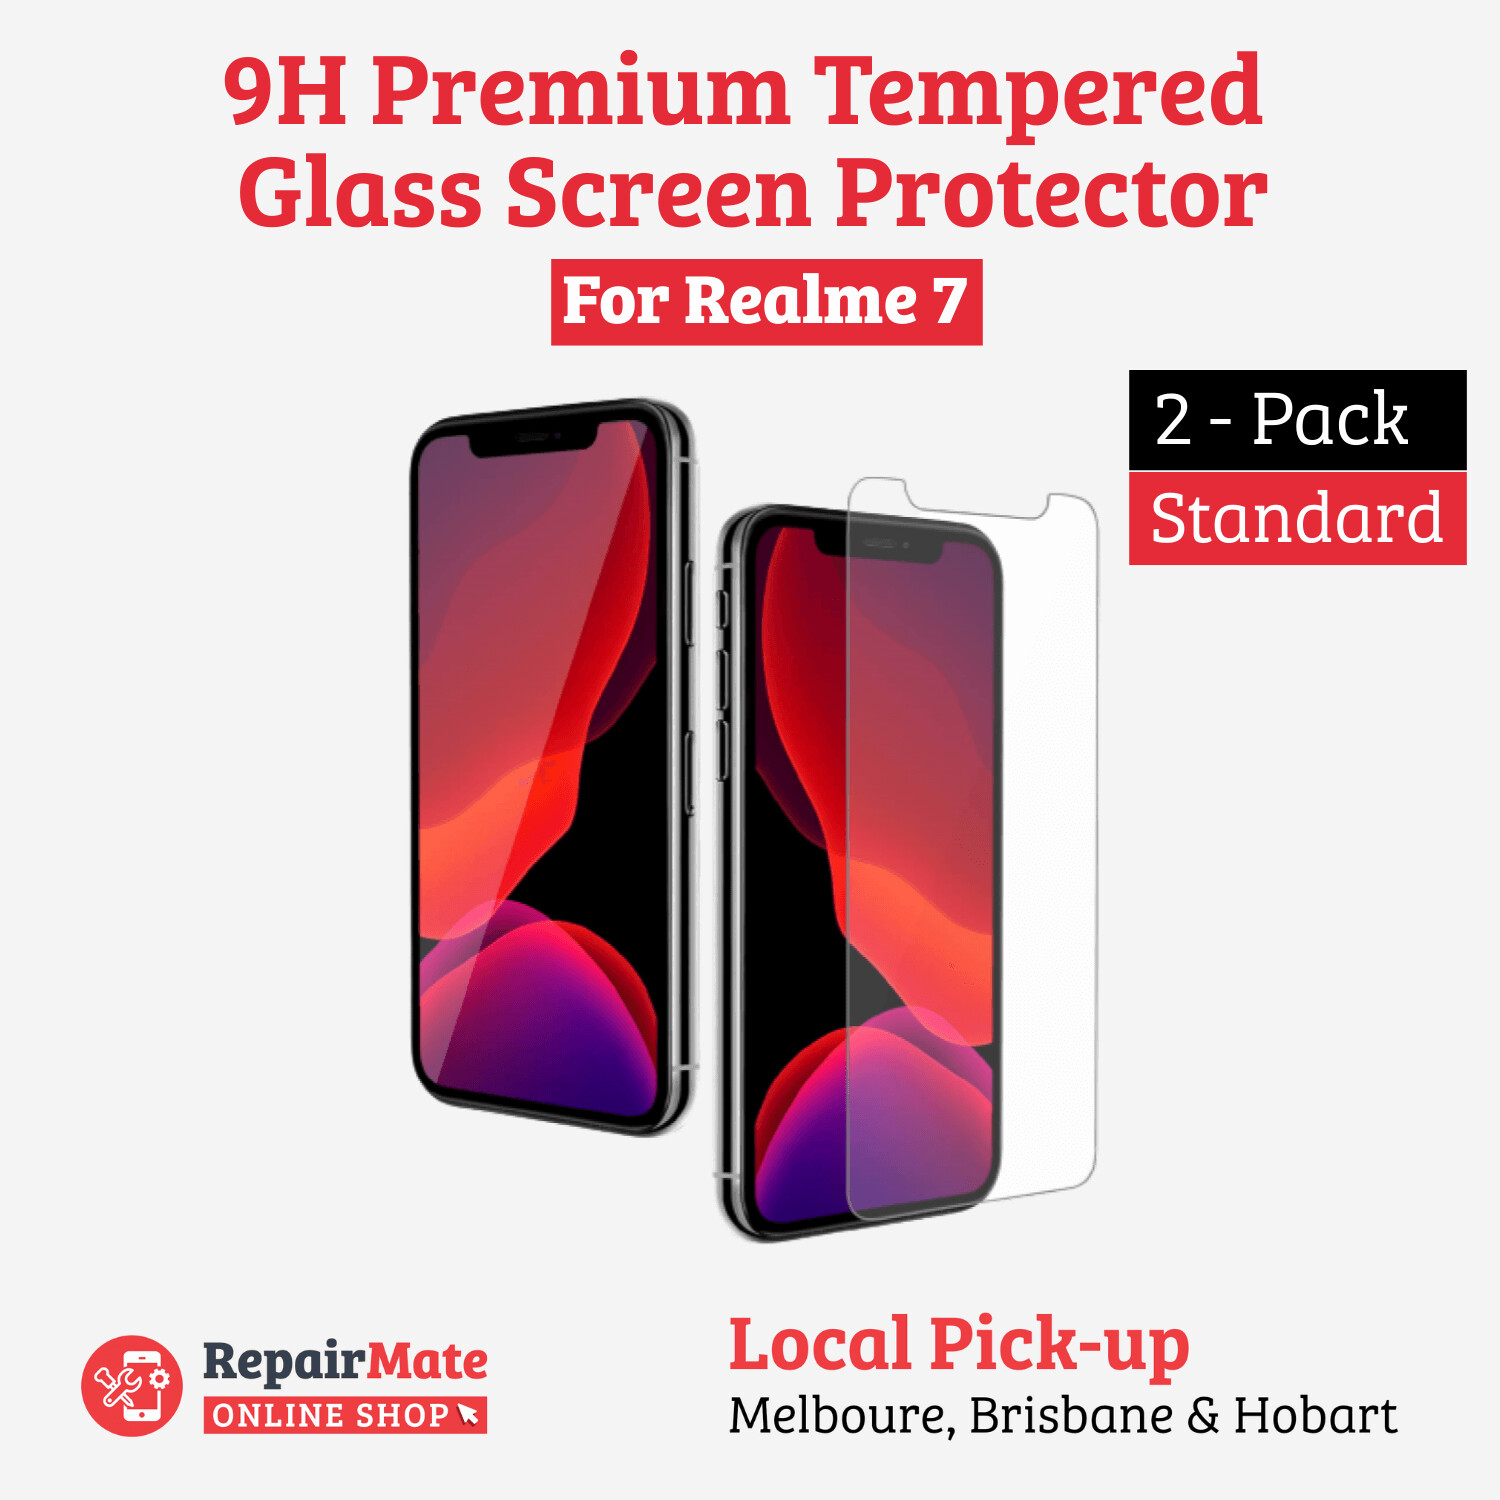 Realme 7 9H Premium Tempered Glass Screen Protector [2 Pack]